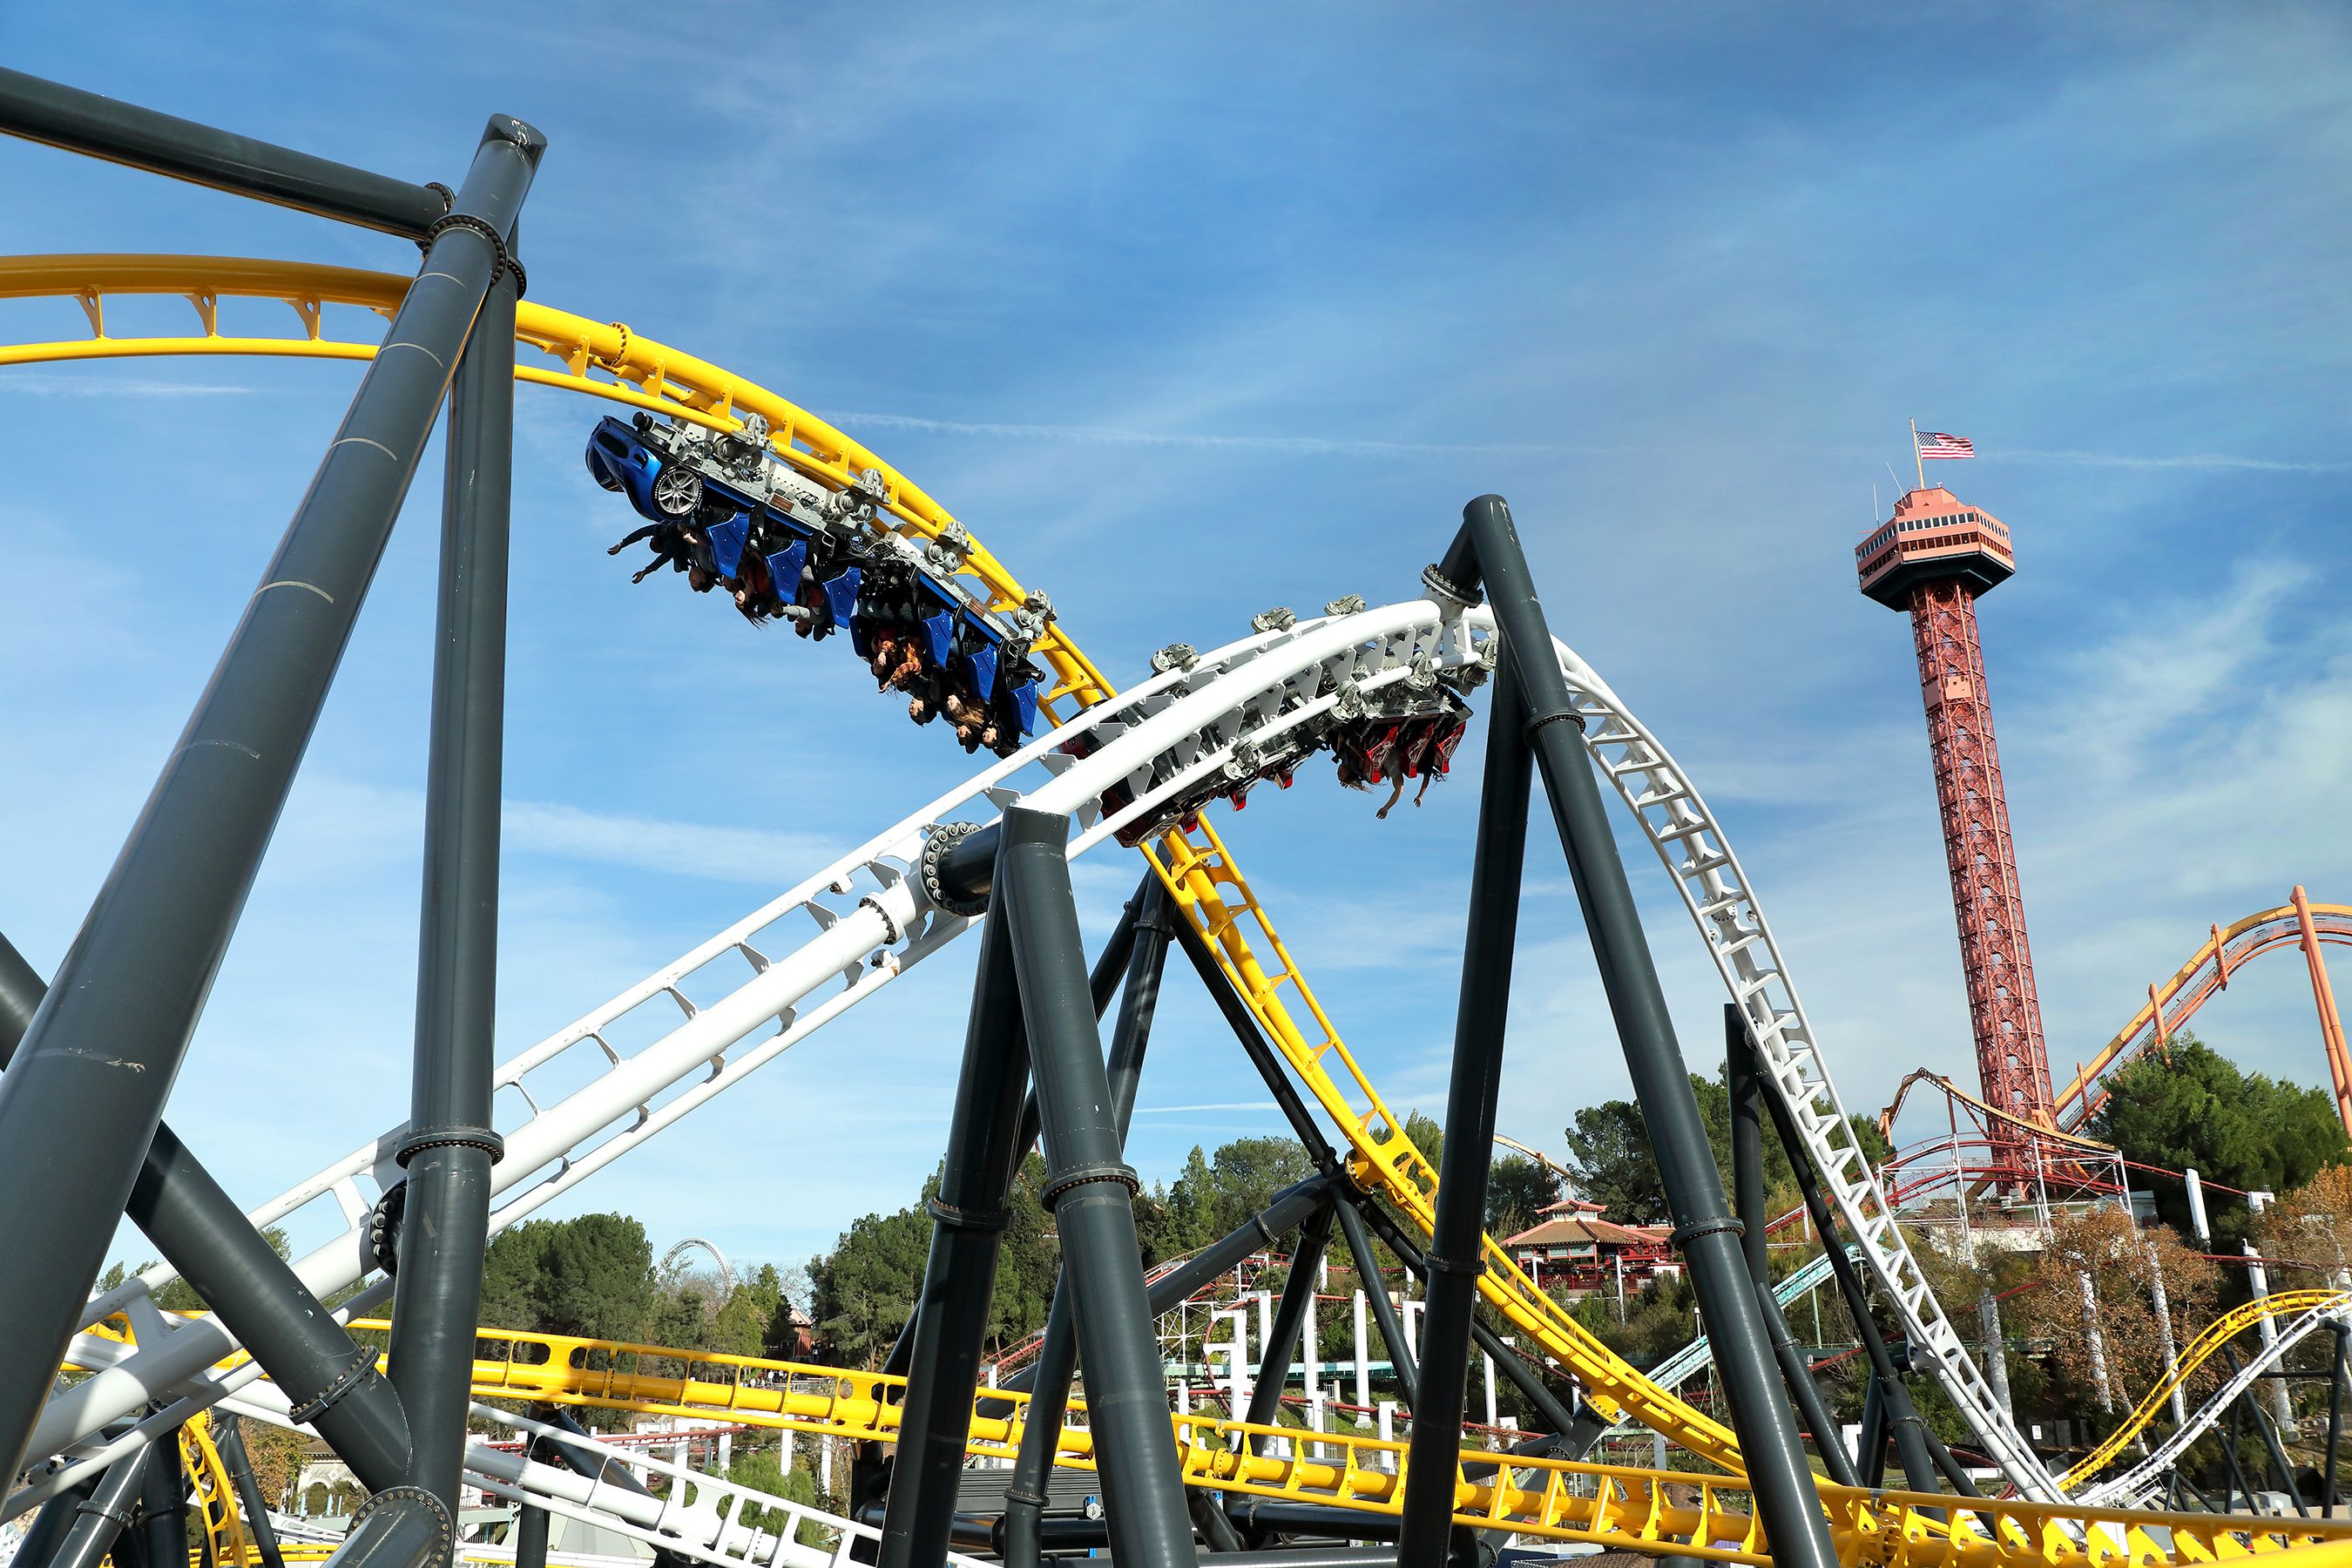 West Coast Customs opens a coaster at Six Flags